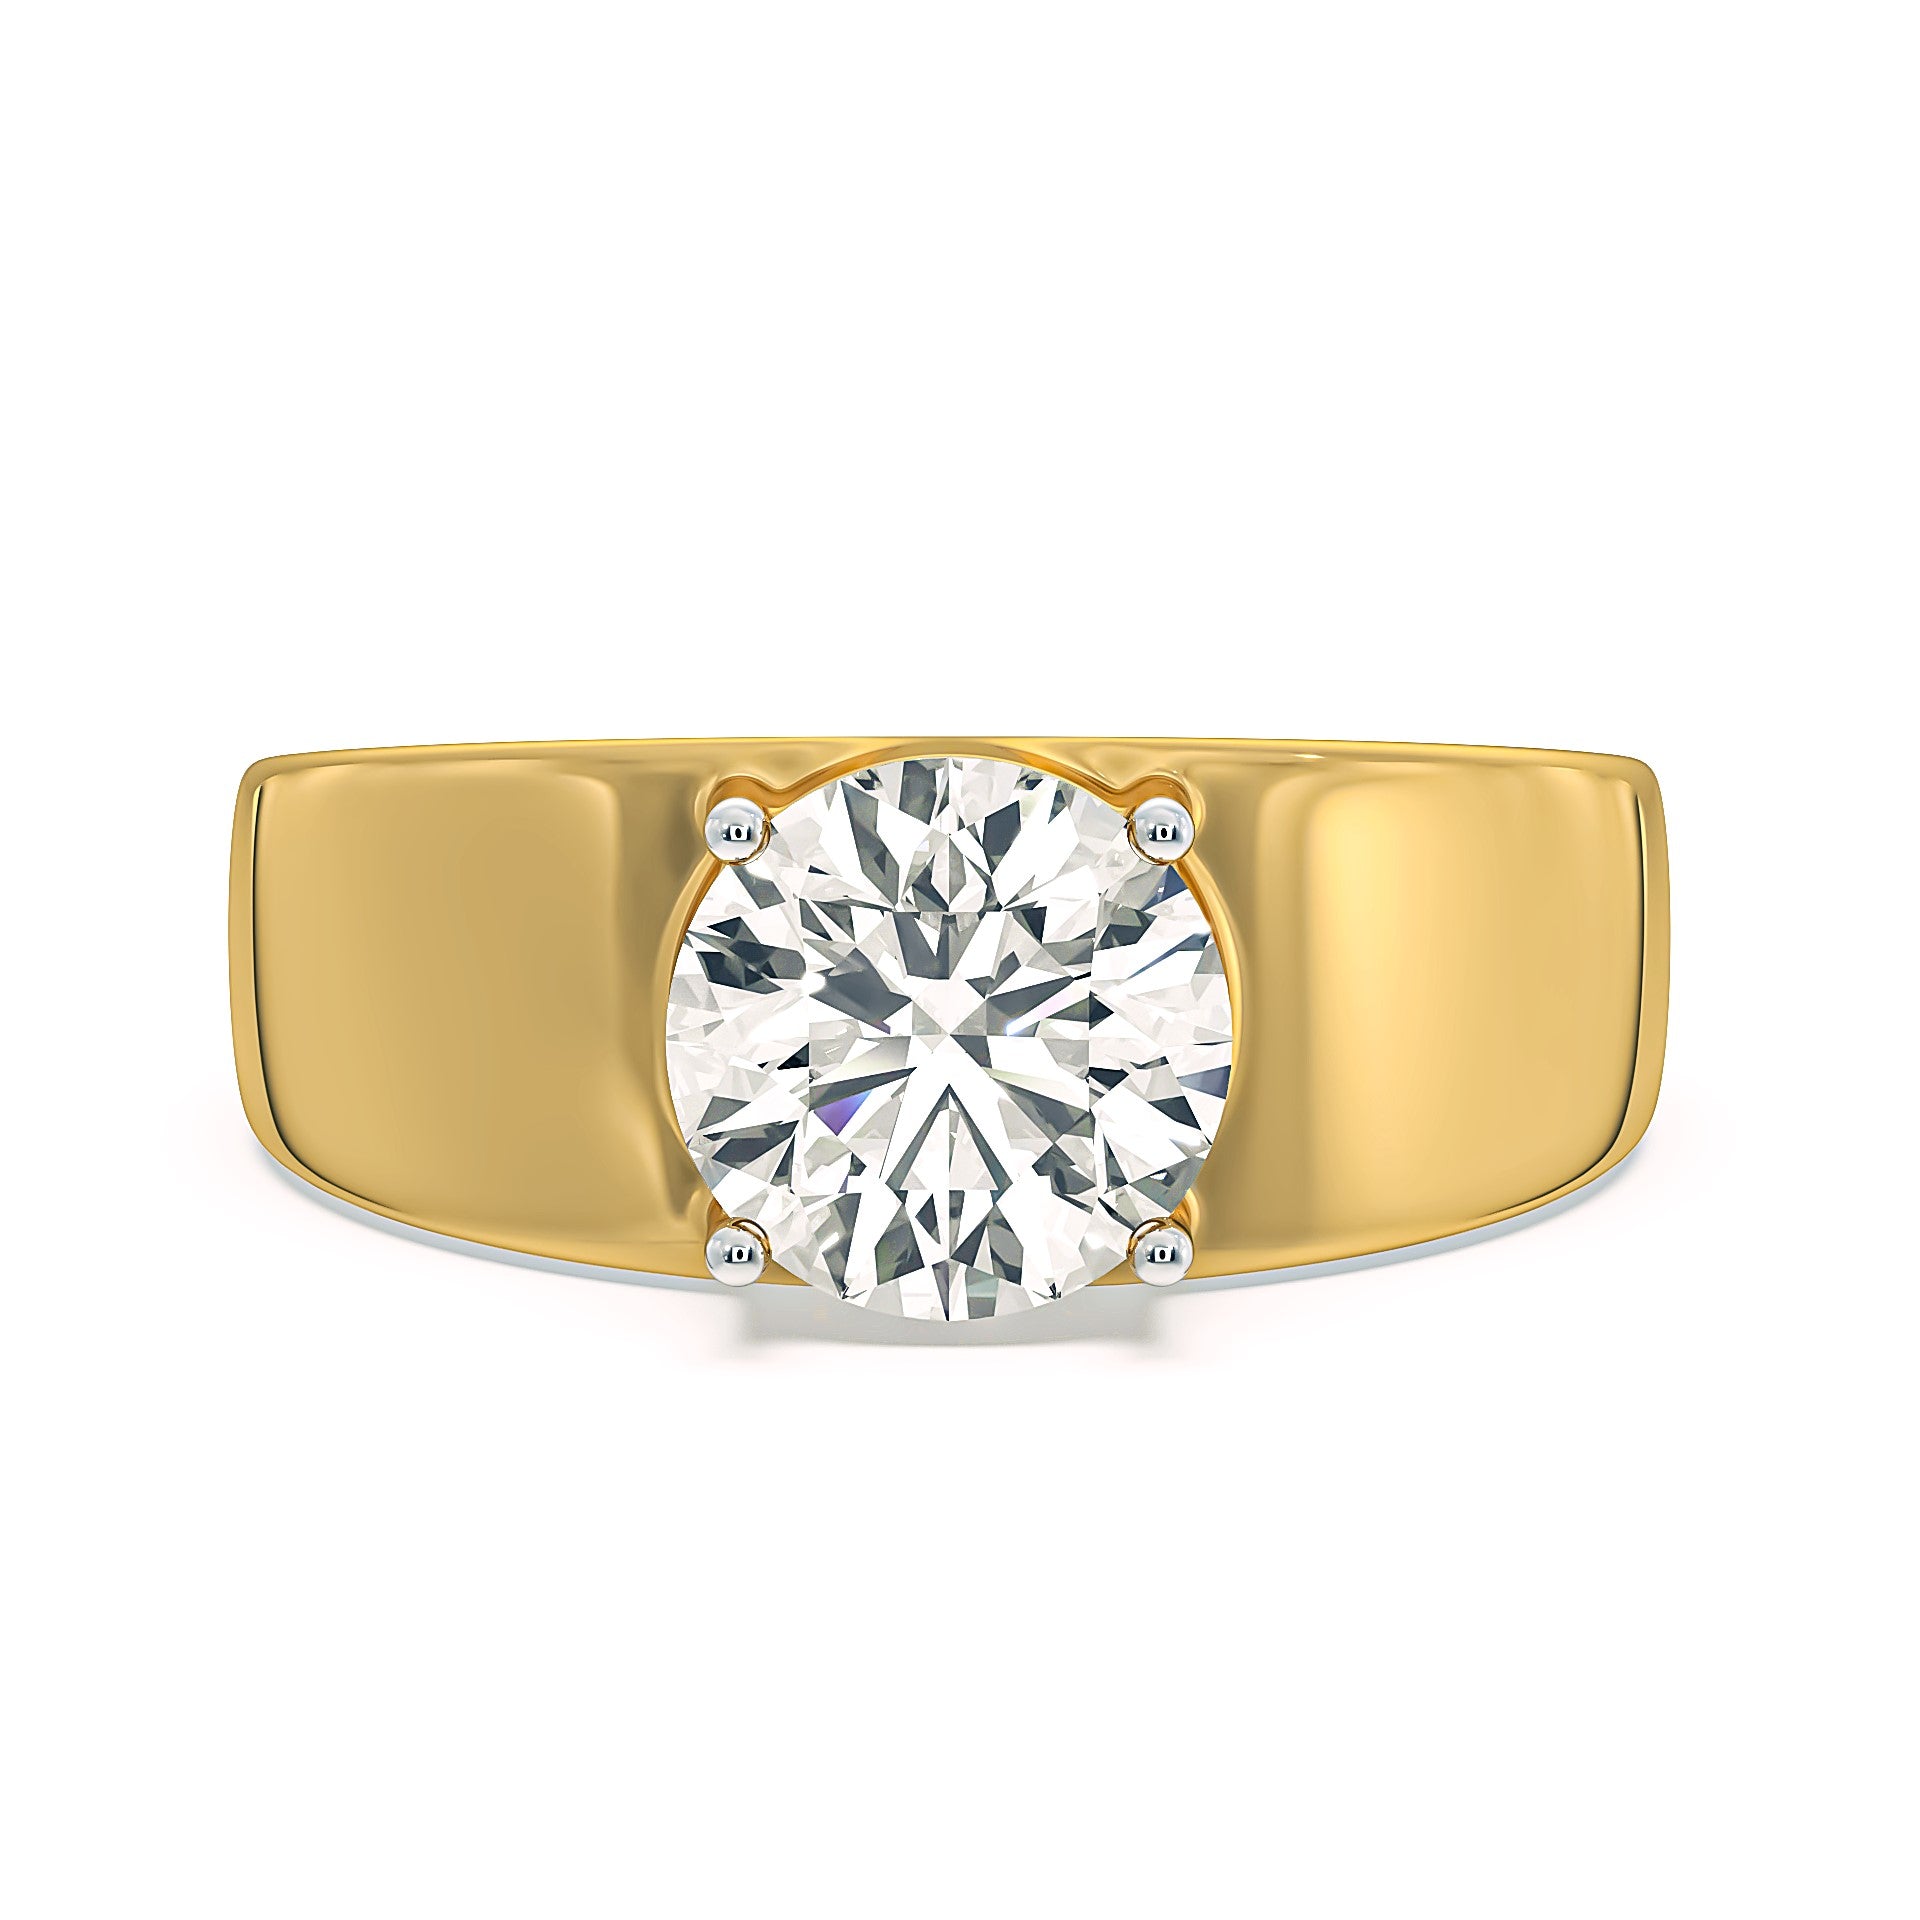 Myza Solitaire: Affordable Luxury Gold Men's Ring with Lab-Grown Diamonds